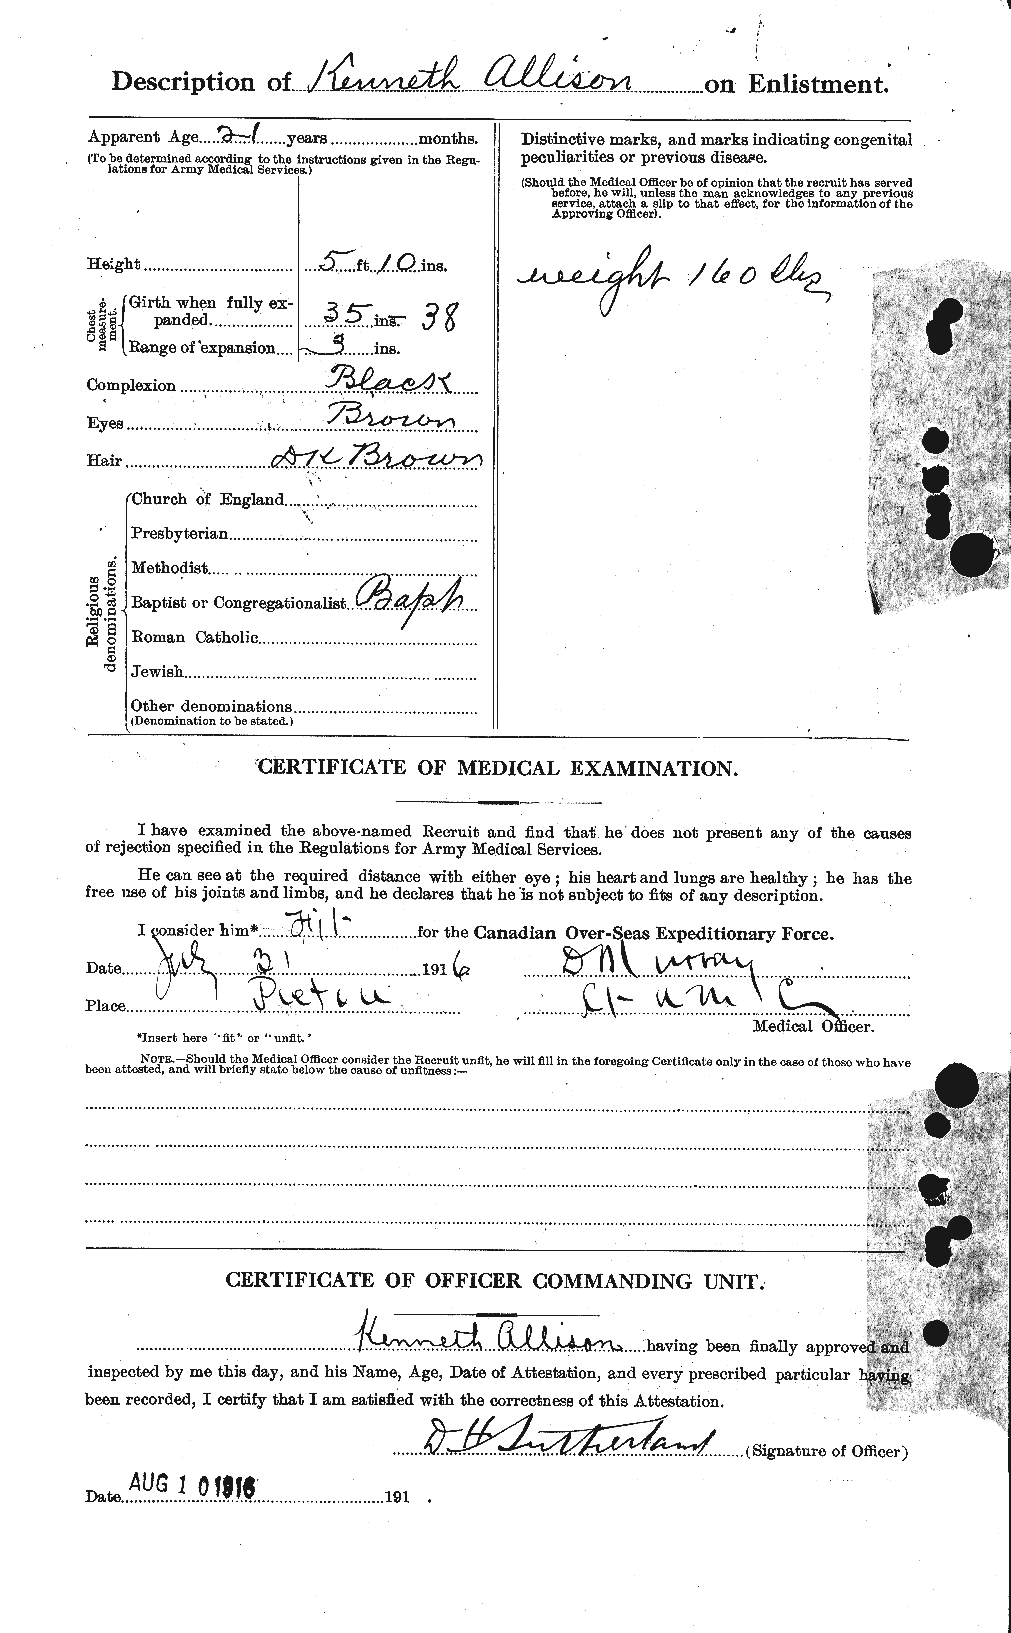 Personnel Records of the First World War - CEF 208506b